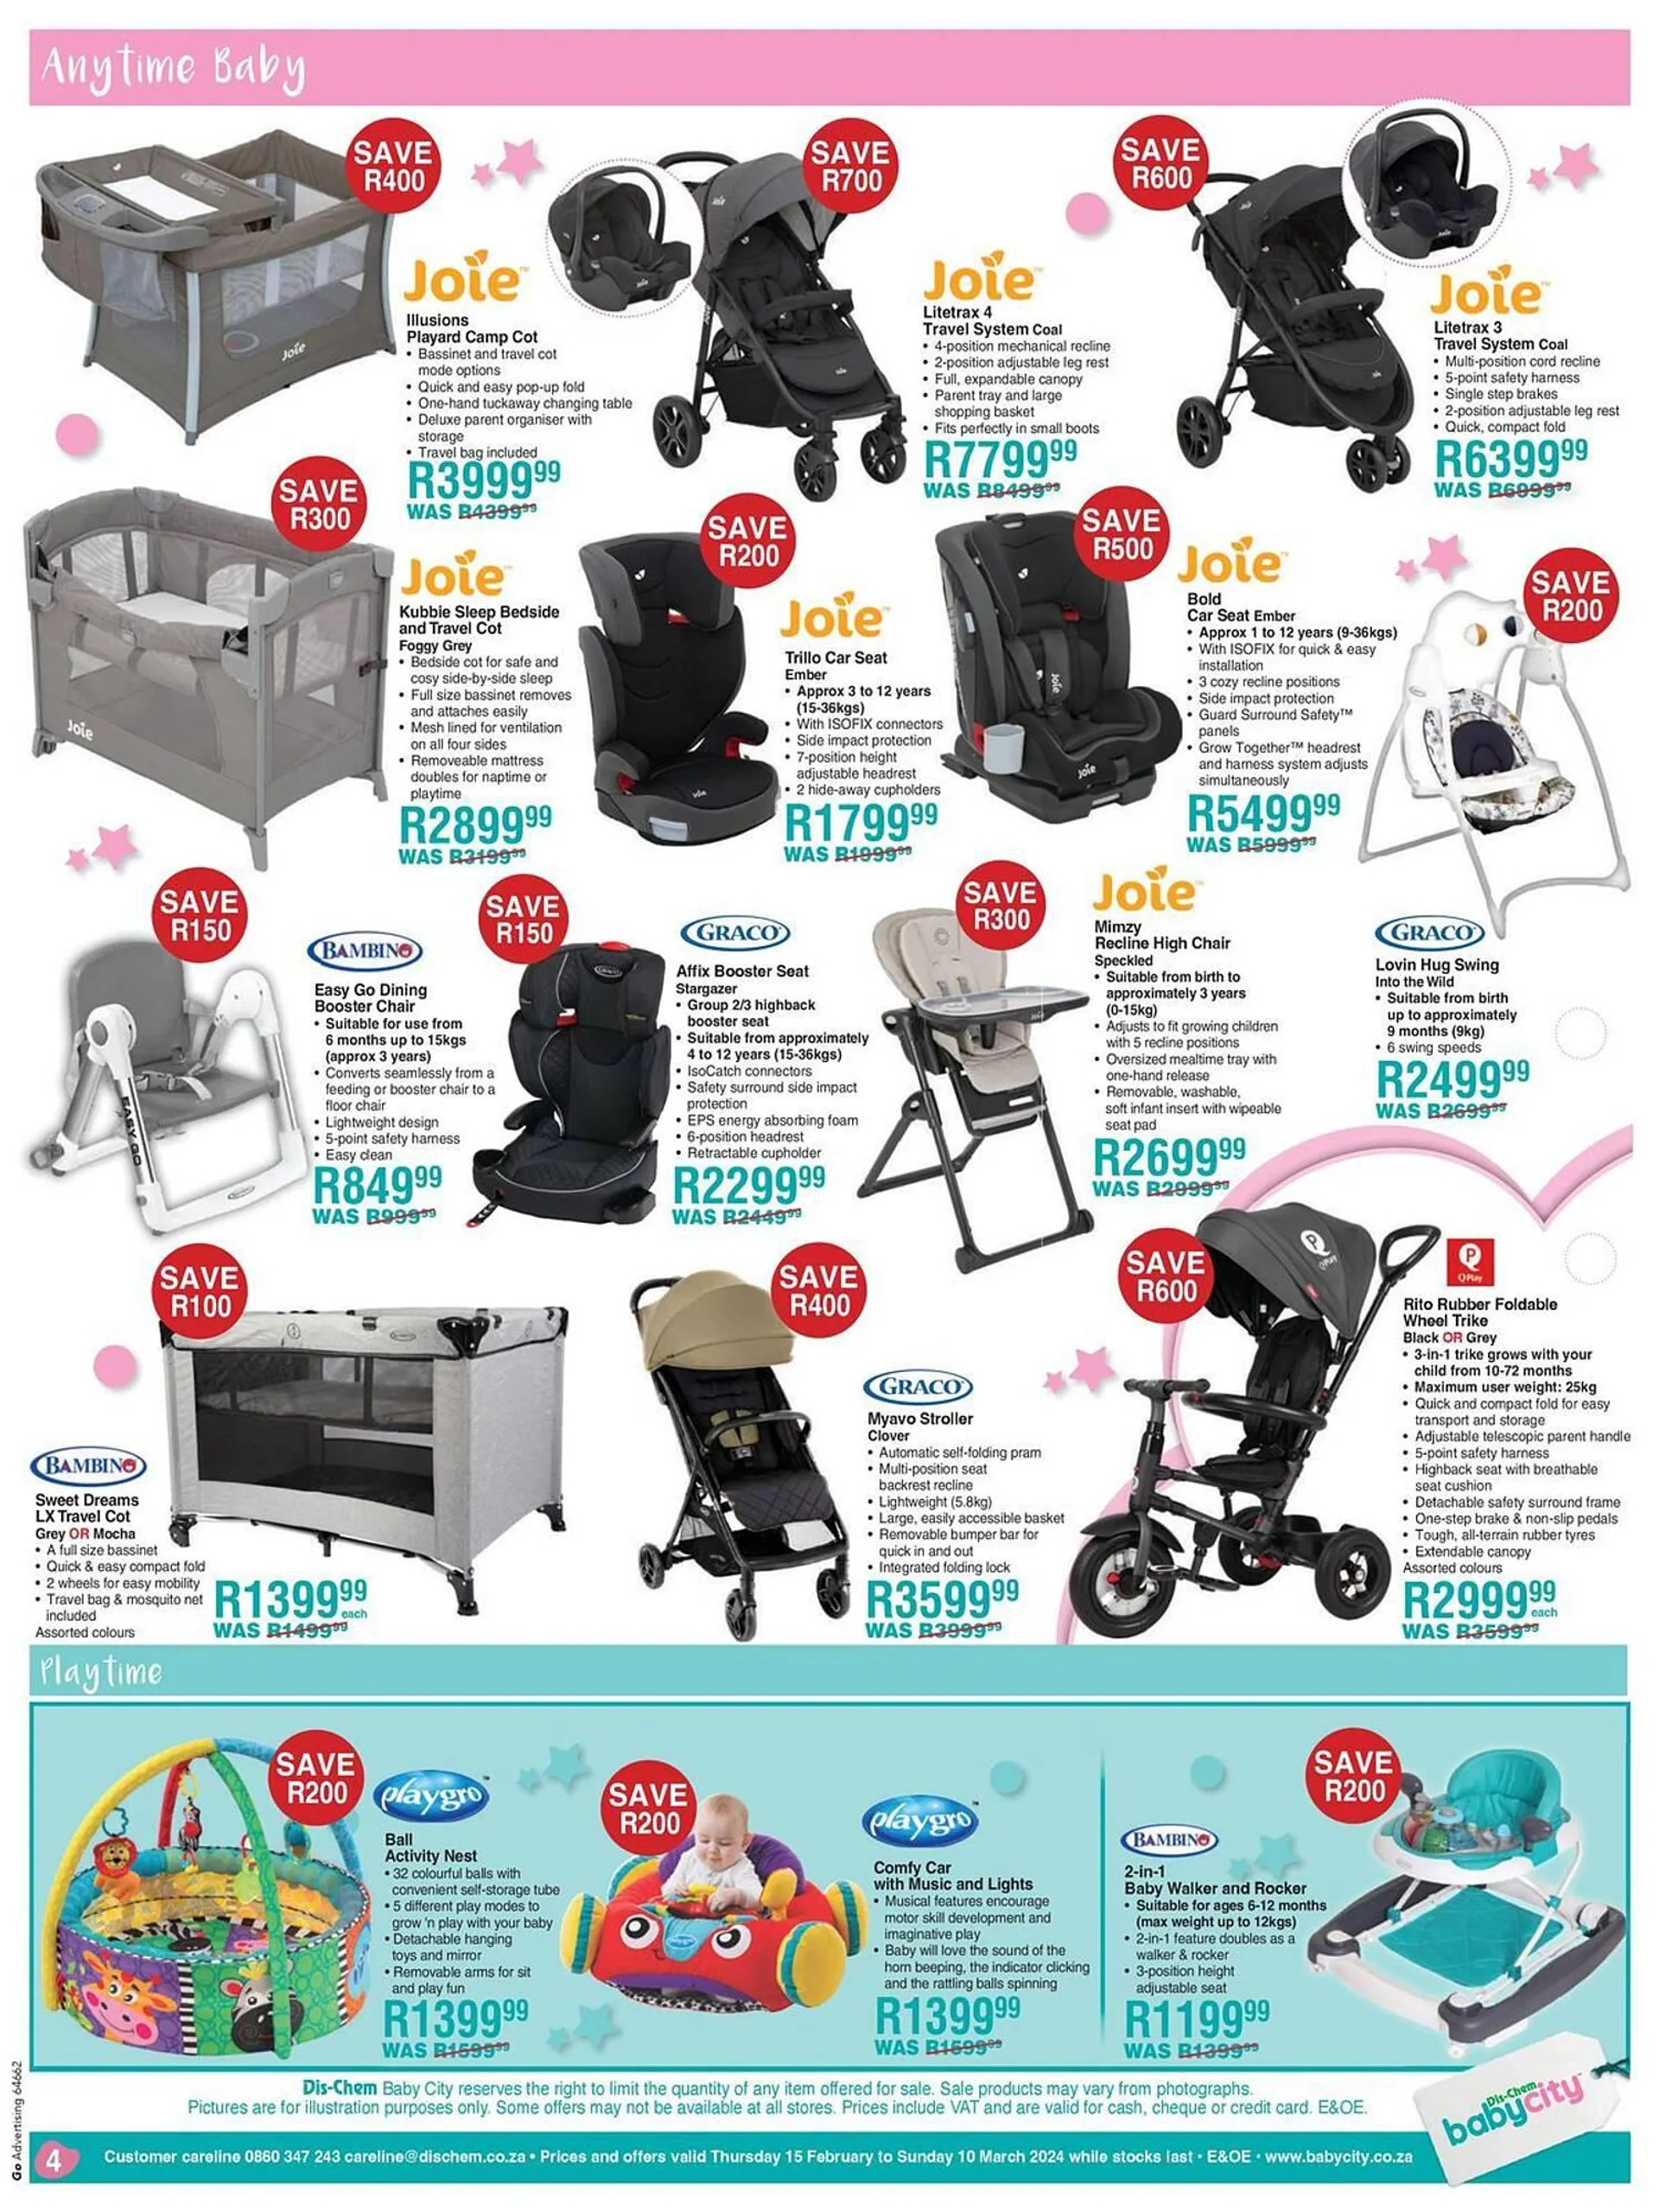 Baby City catalogue - 1 March 10 March 2024 - Page 4